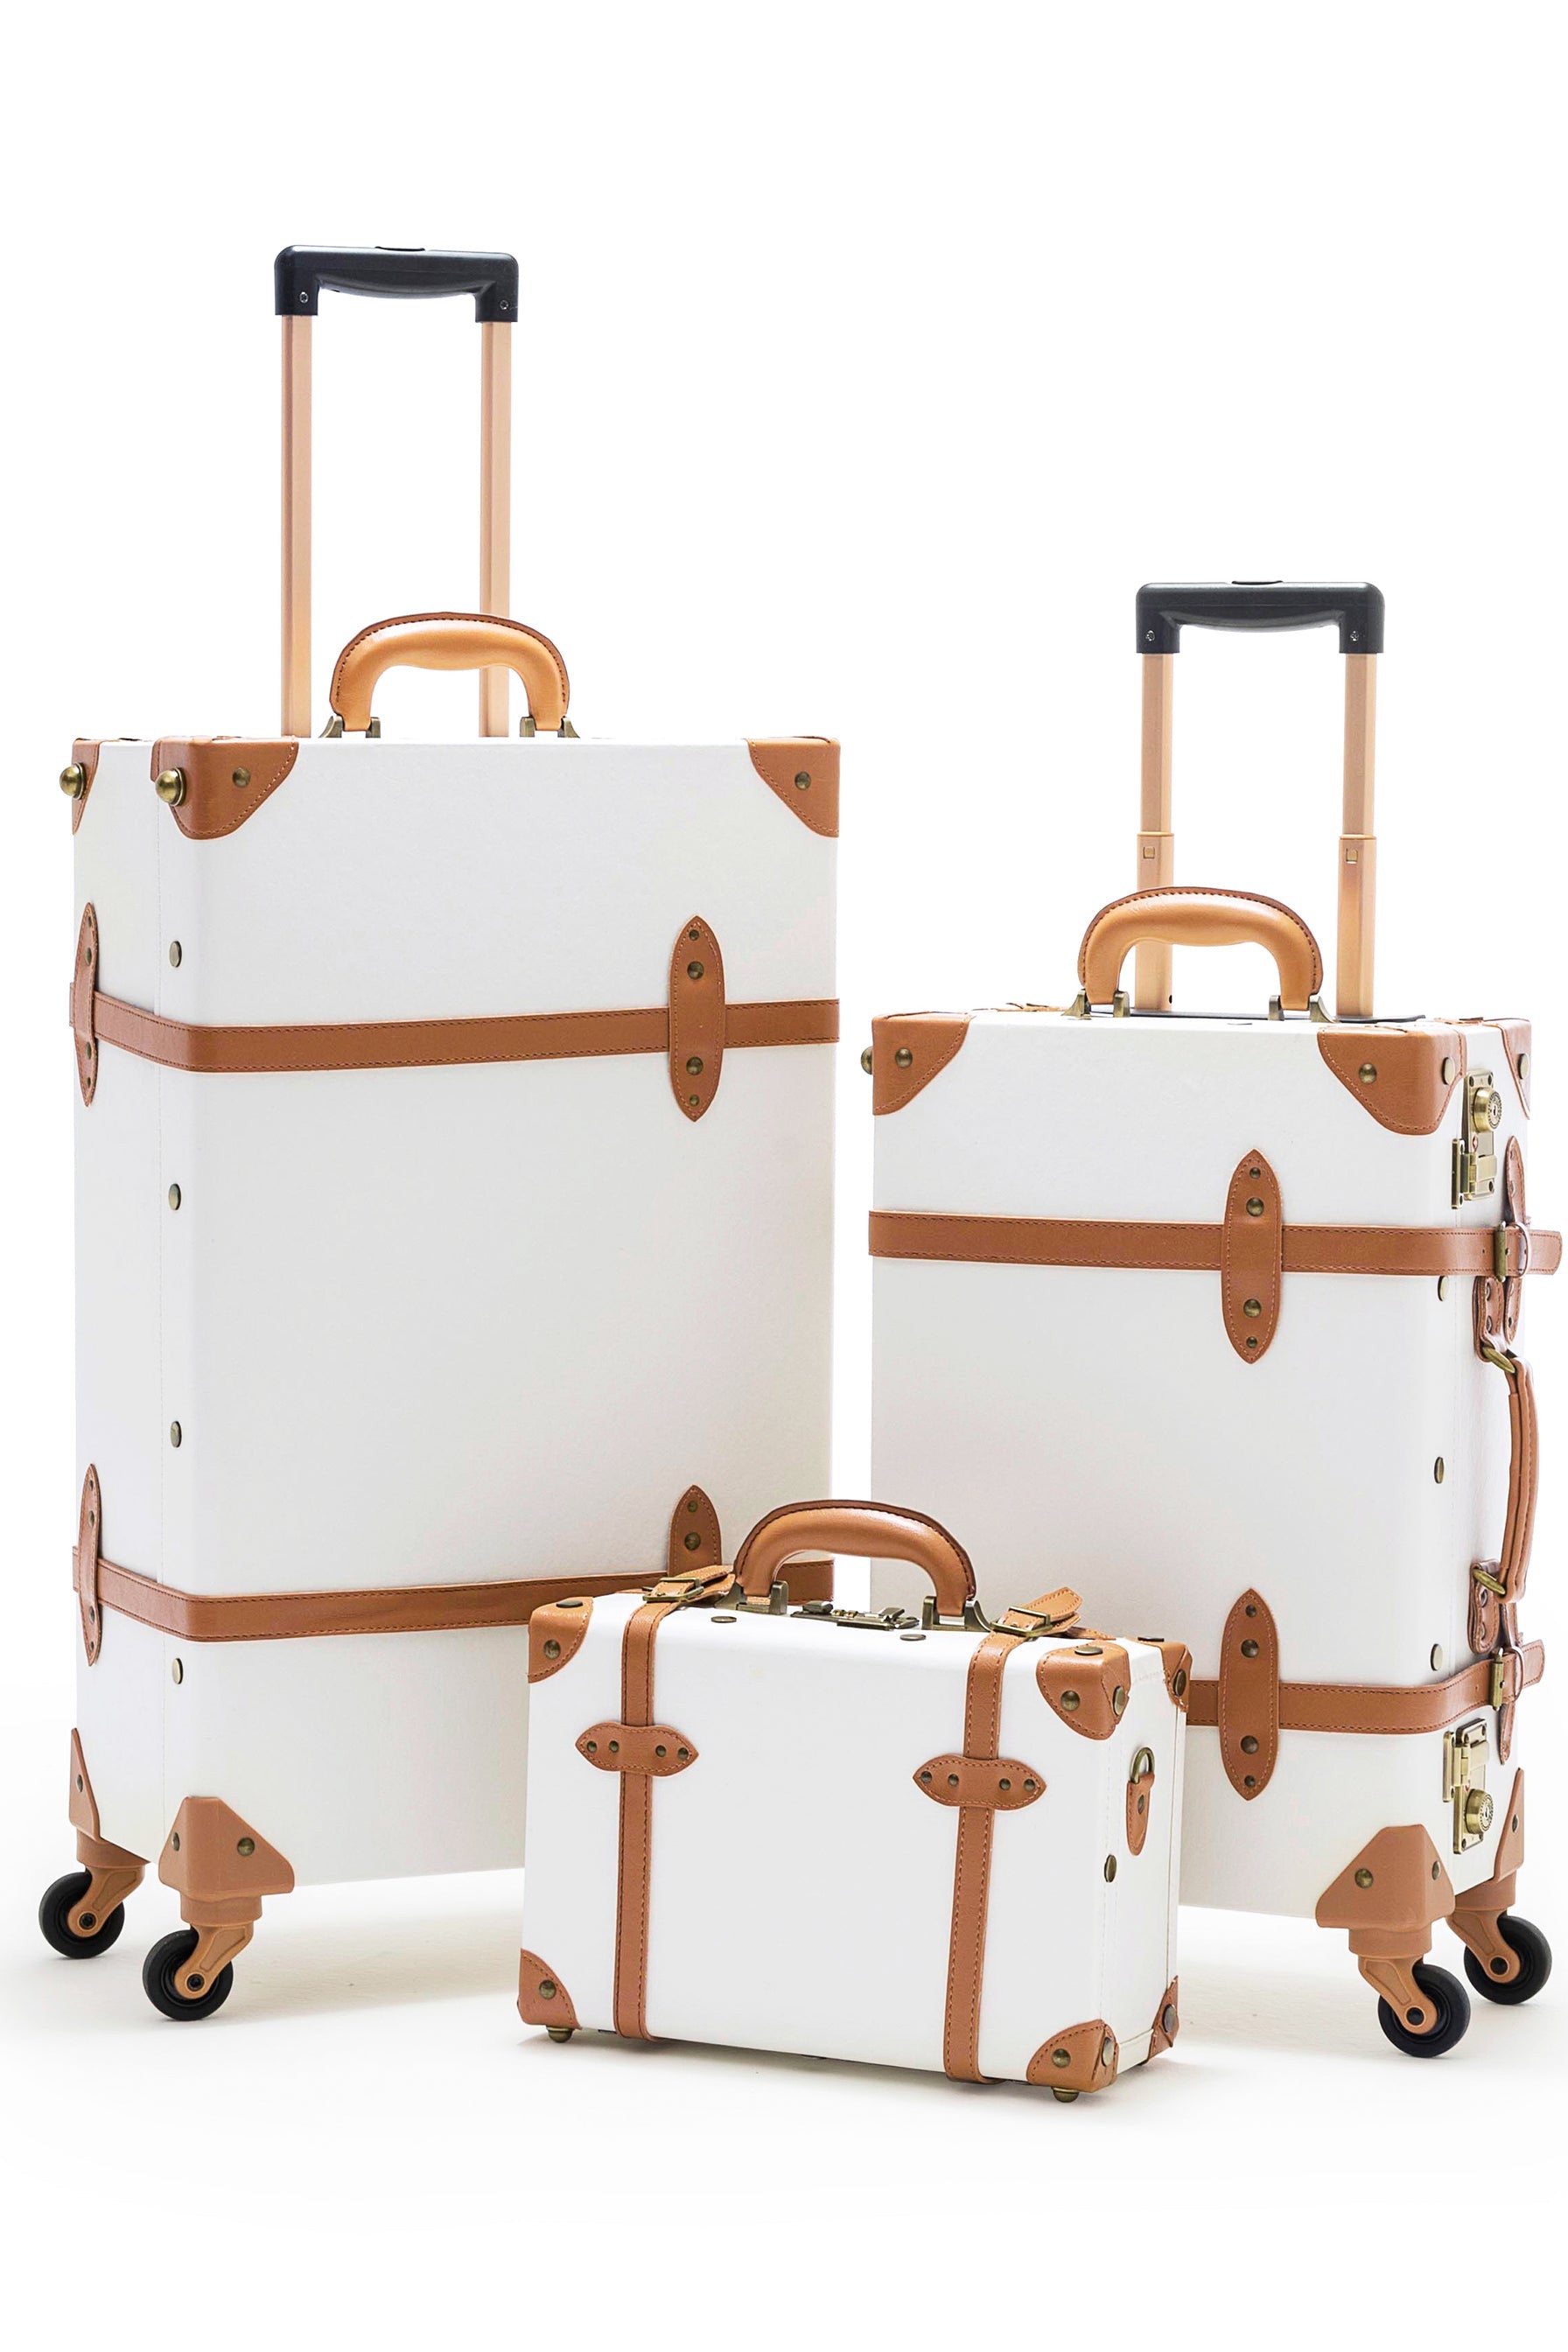 COTRUNKAGE Minimalist 2 Piece Vintage Luggage Sets Travel Carry On Suitcase  for Women with Spinner Wheels, Pearl White